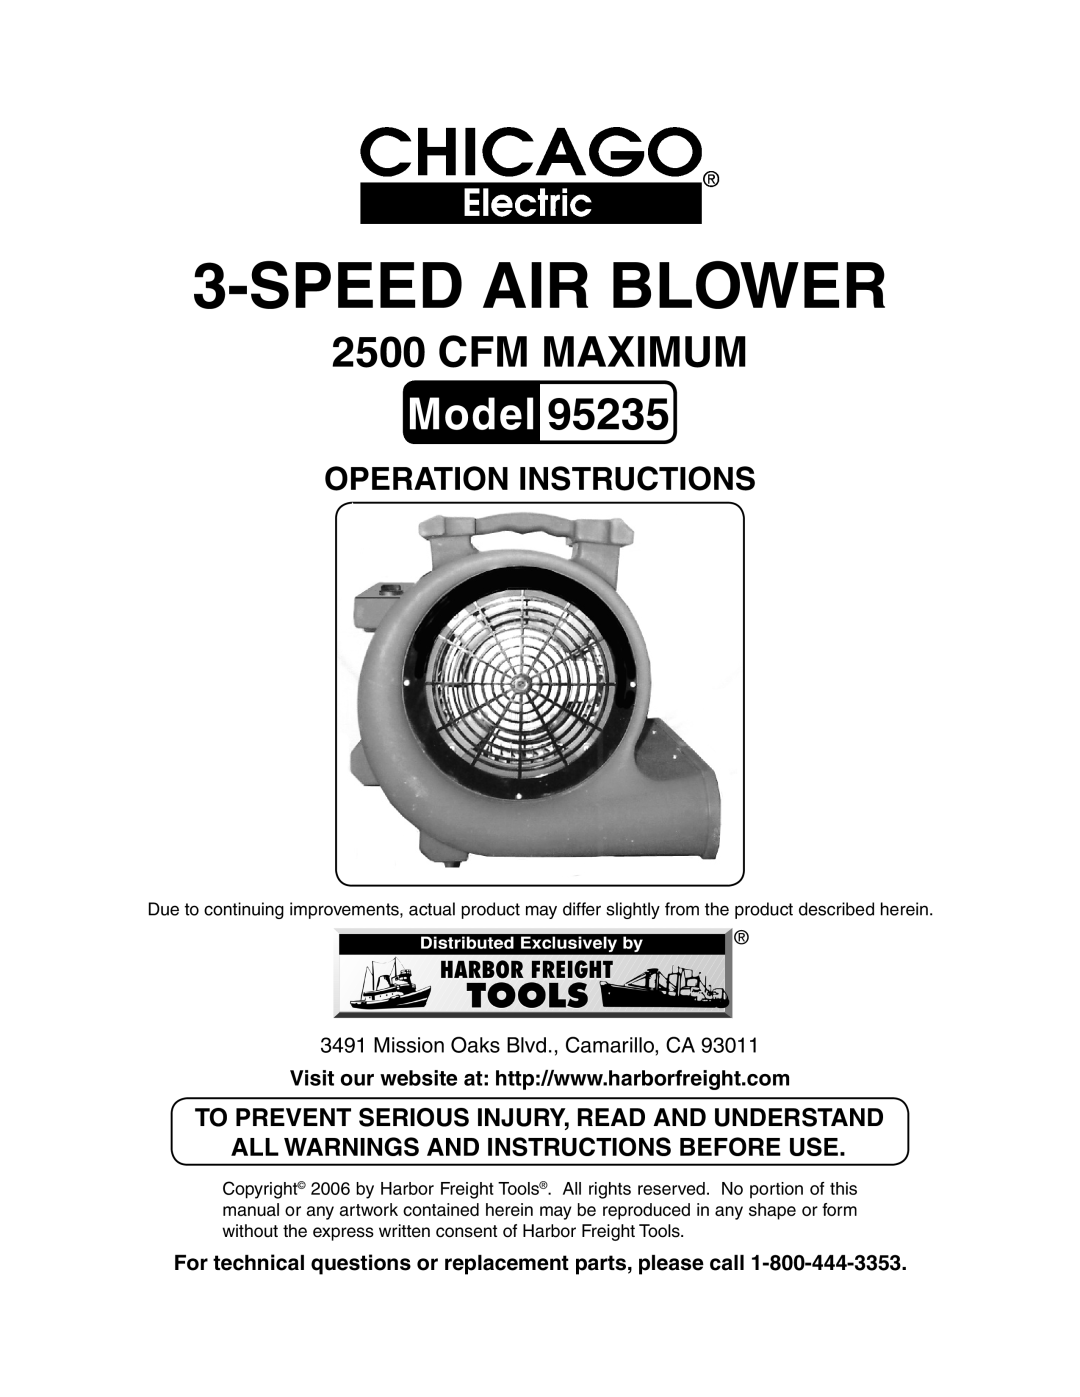 Chicago Electric 95235 manual Model, Cfm Maximum, Operation Instructions, To prevent serious injury, read and understand 